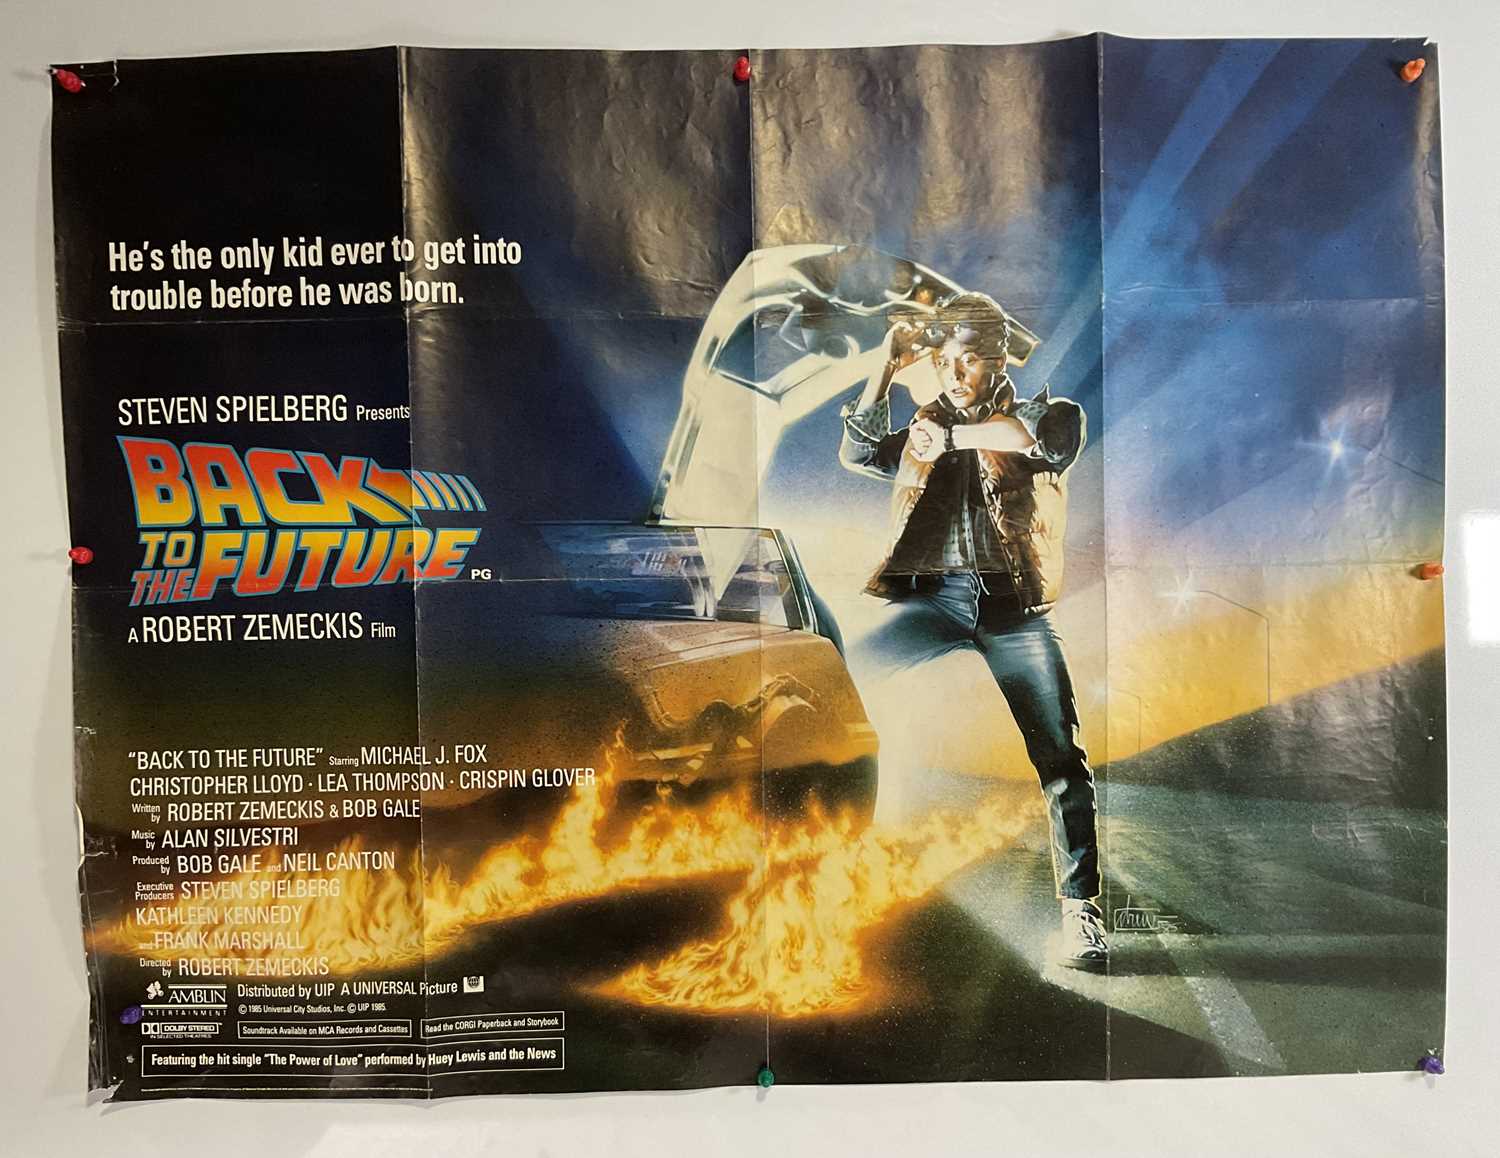 BACK TO THE FUTURE (1985) UK Quad film poster, artwork by Drew Struzan for the classic 80s time